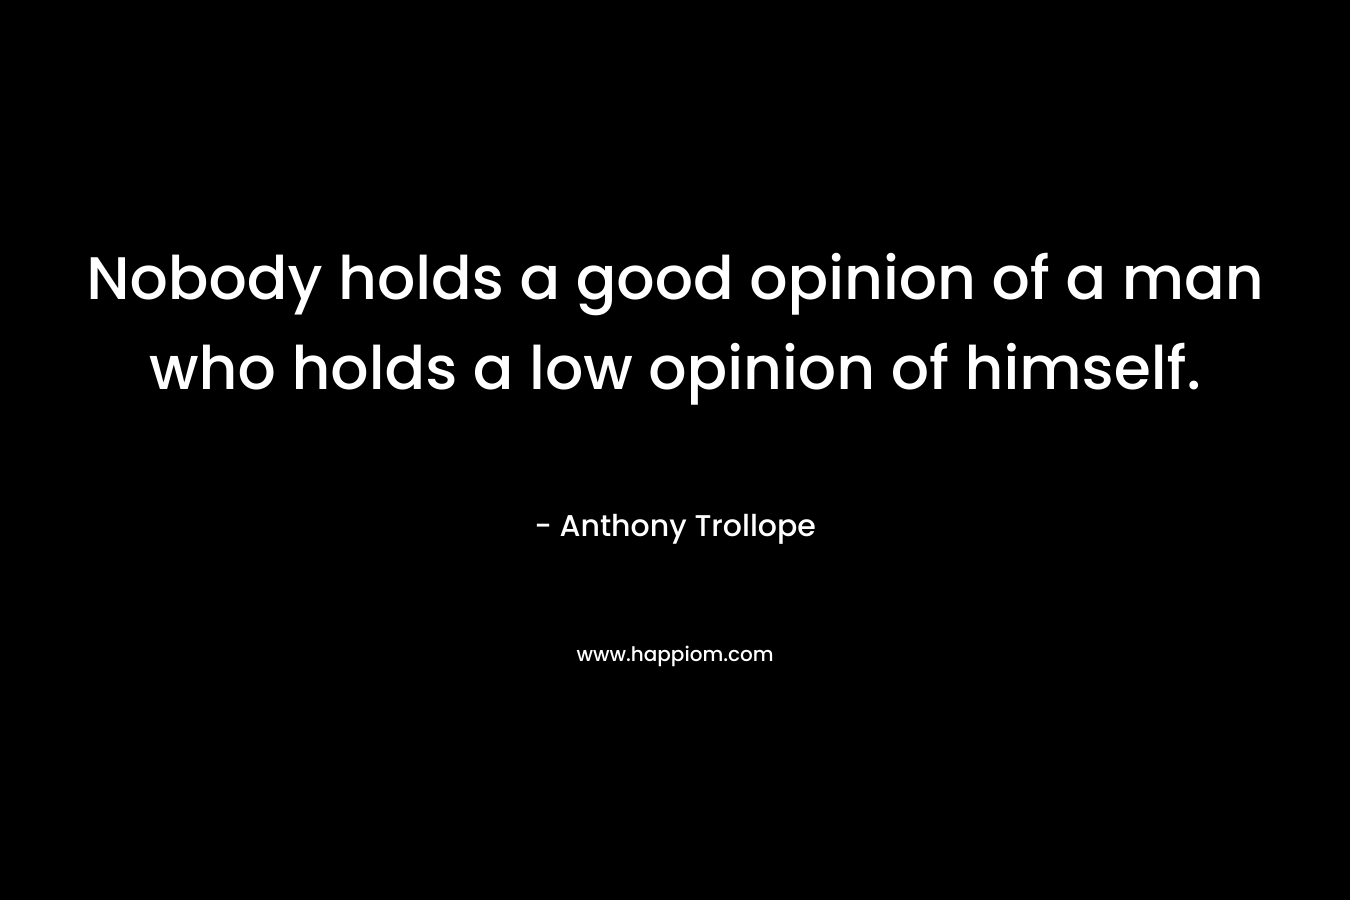 Nobody holds a good opinion of a man who holds a low opinion of himself.